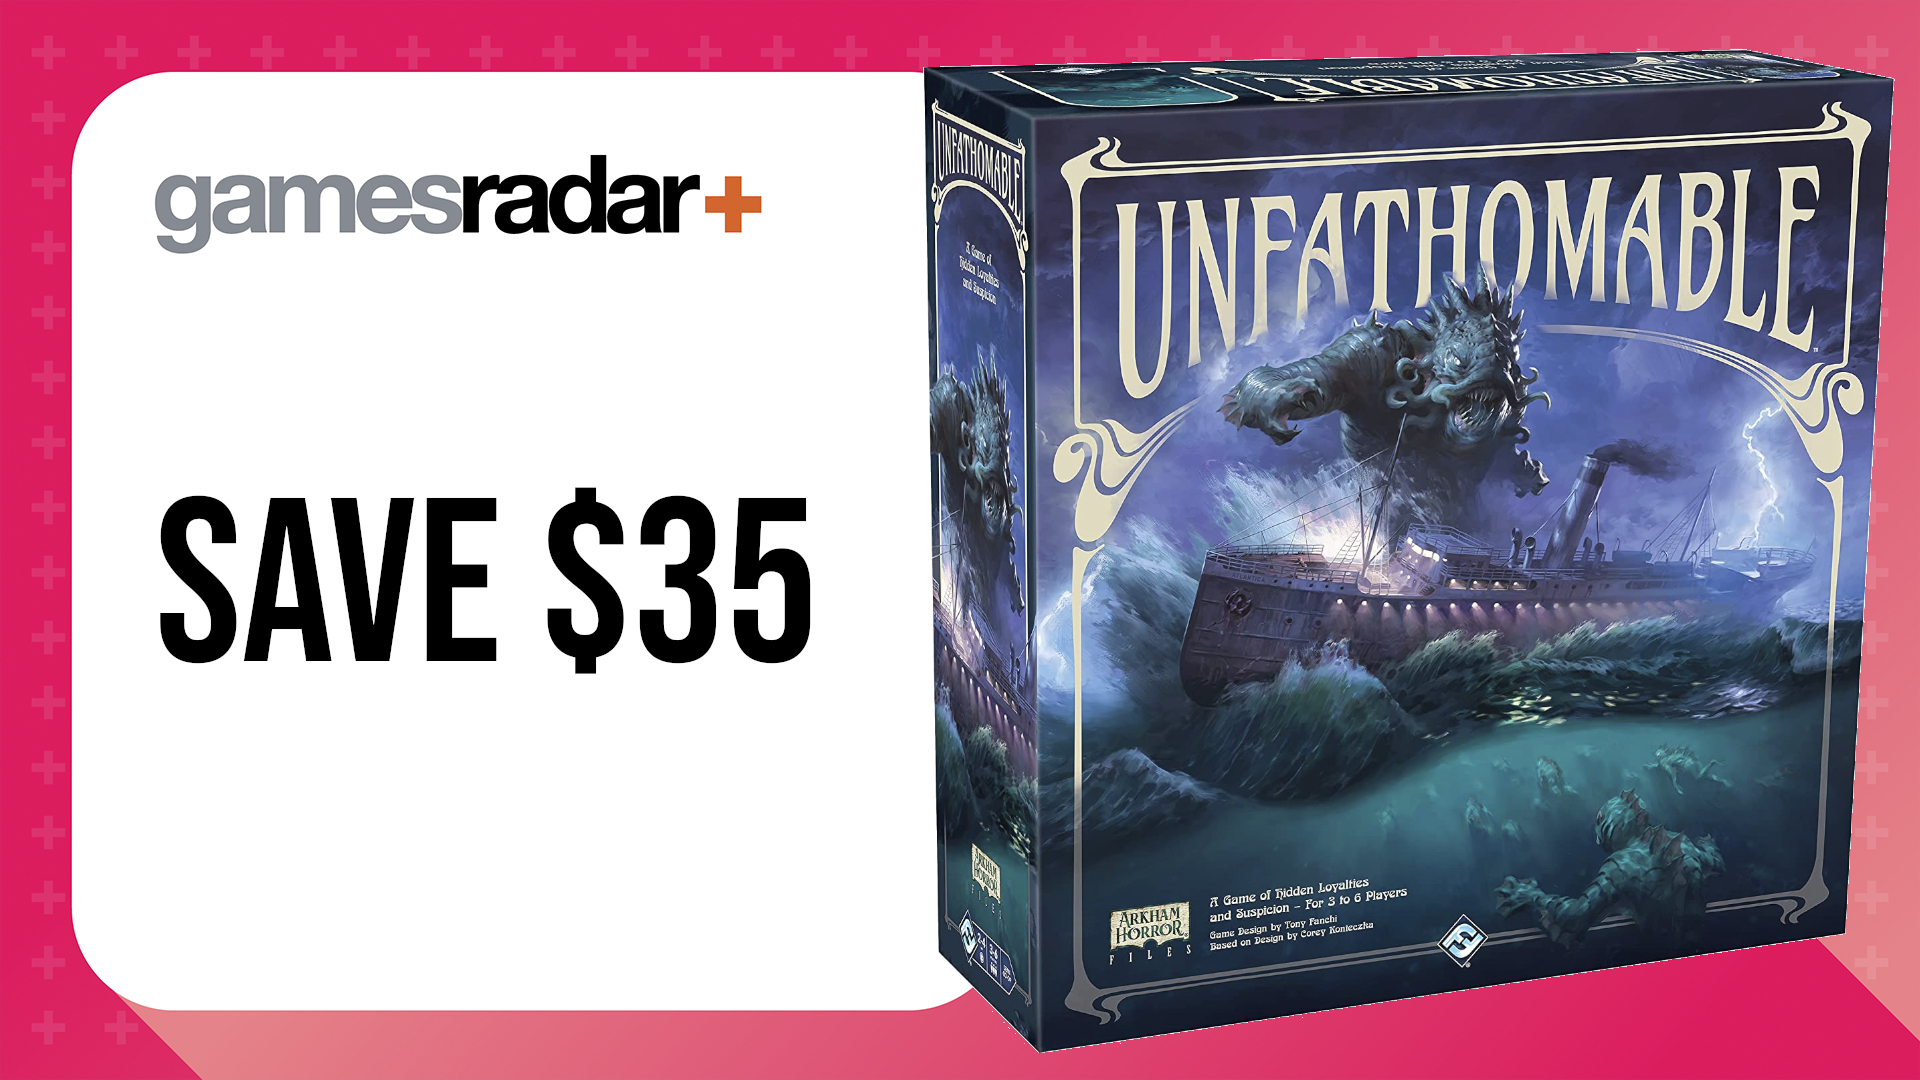 Cyber Monday board game deals with Unfathomable